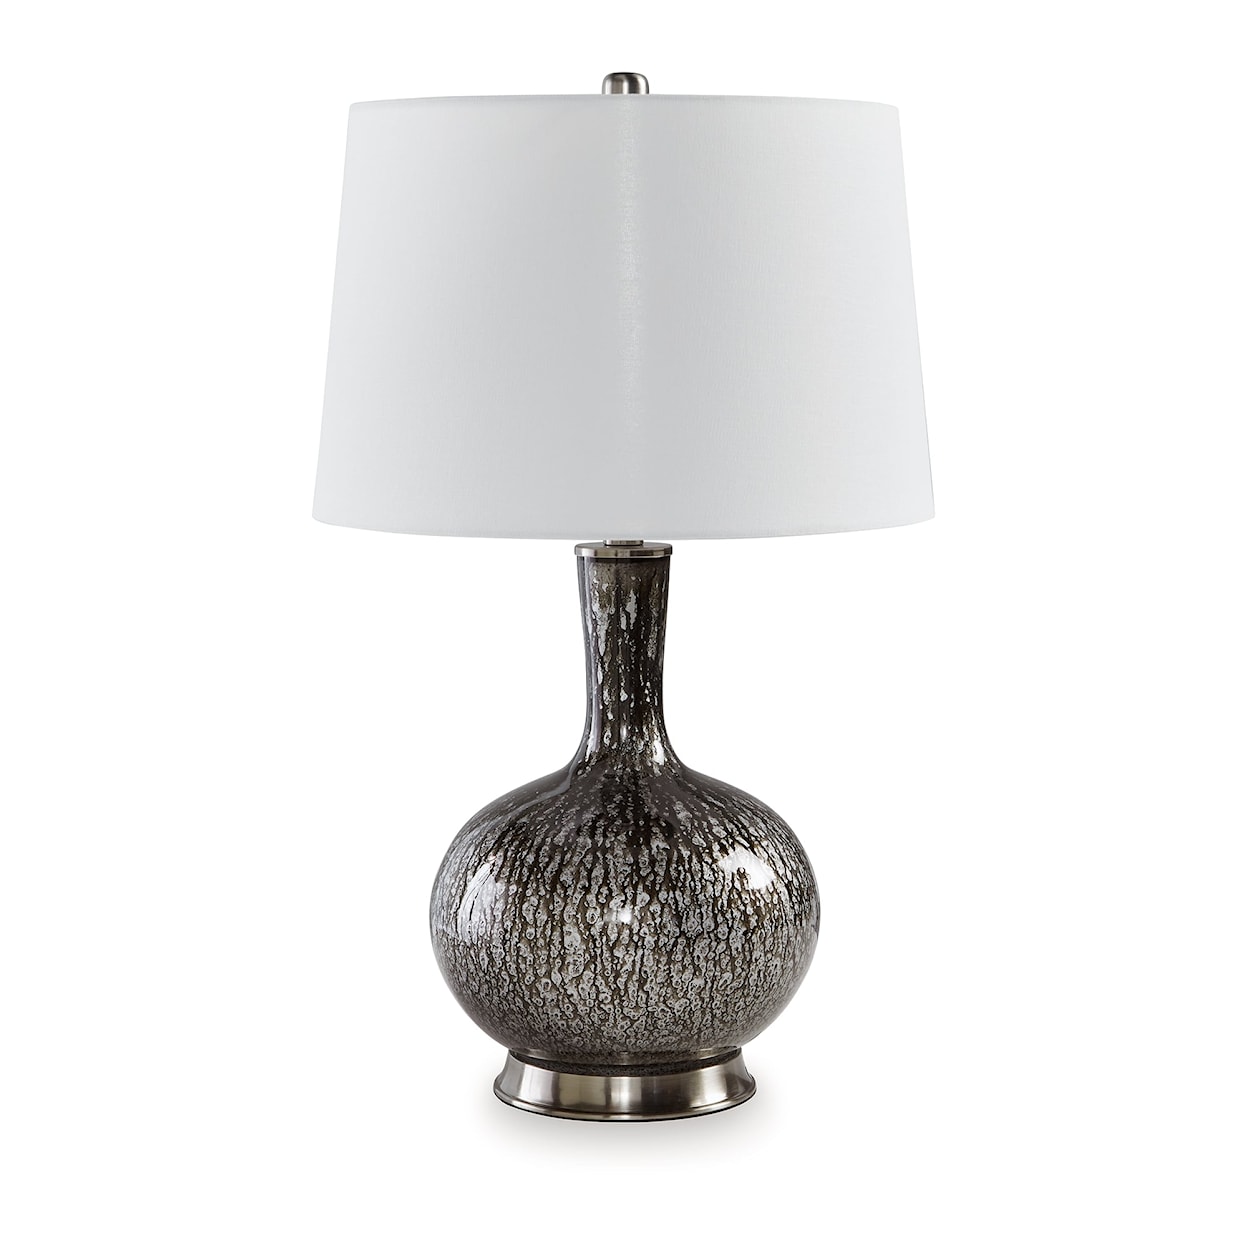 Signature Design by Ashley Tenslow Glass Table Lamp